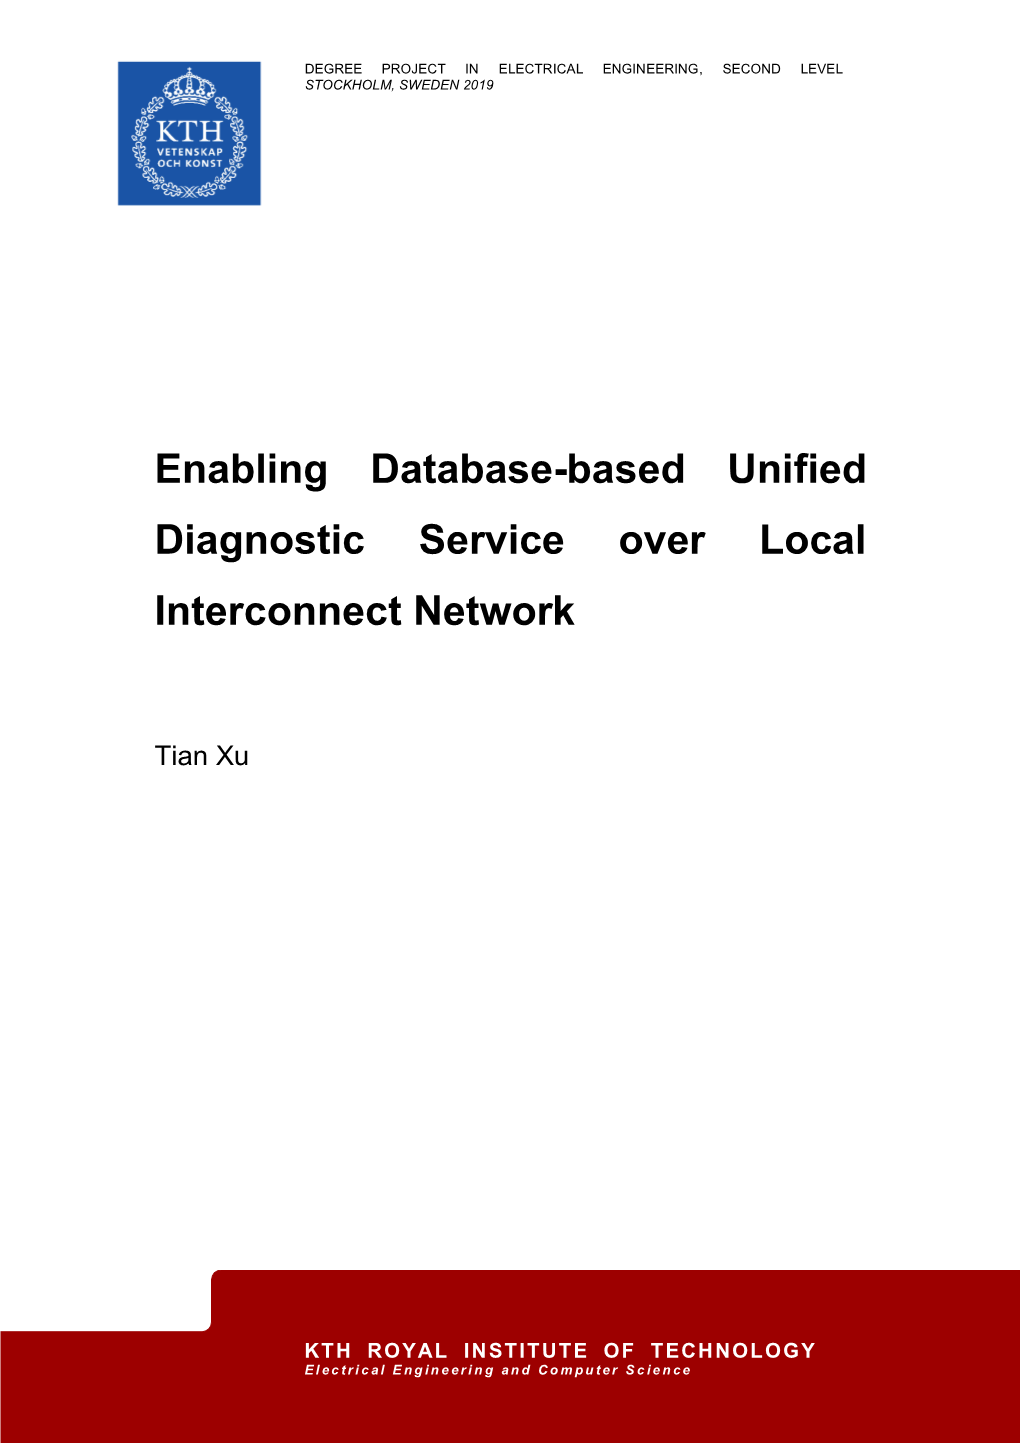 Enabling Database-Based Unified Diagnostic Service Over Local Interconnect Network